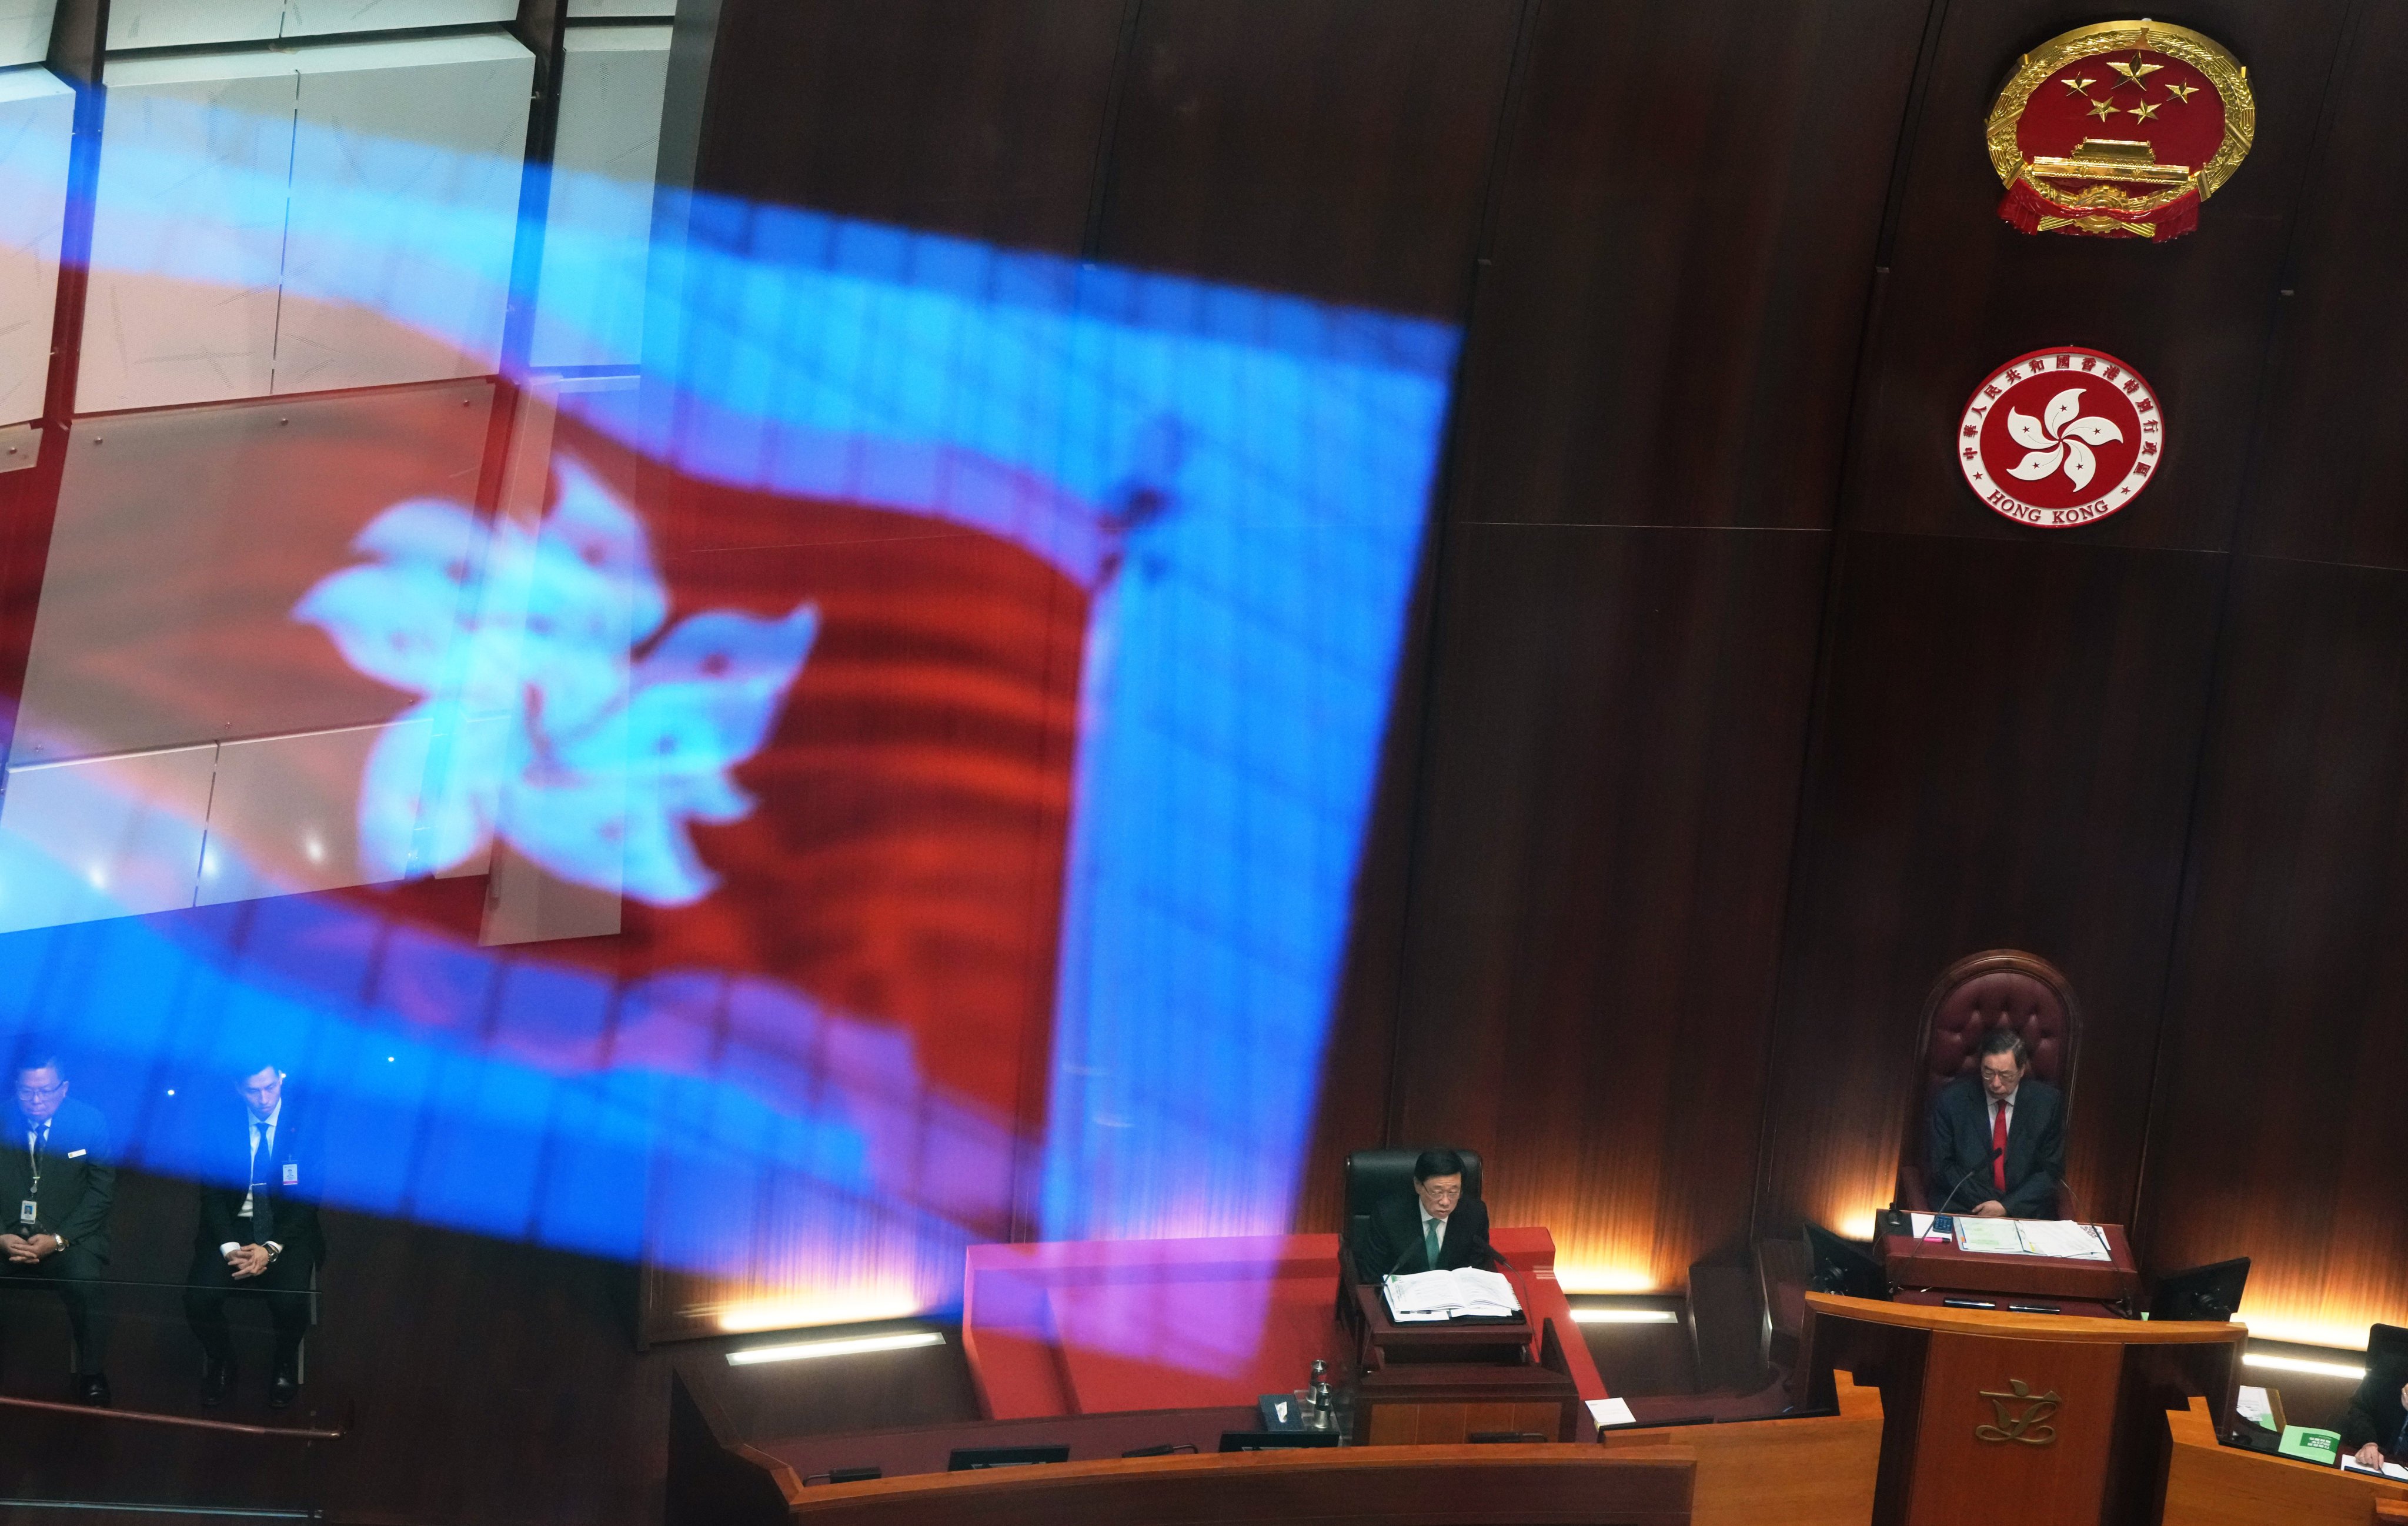 Chief Executive John Lee (left) attends the Question and Answer session at Hong Kong’s Legislative Council chambers, a day after delivering his policy address, as Legco president Andrew Leung listens, on October 26. Photo: Sam Tsang